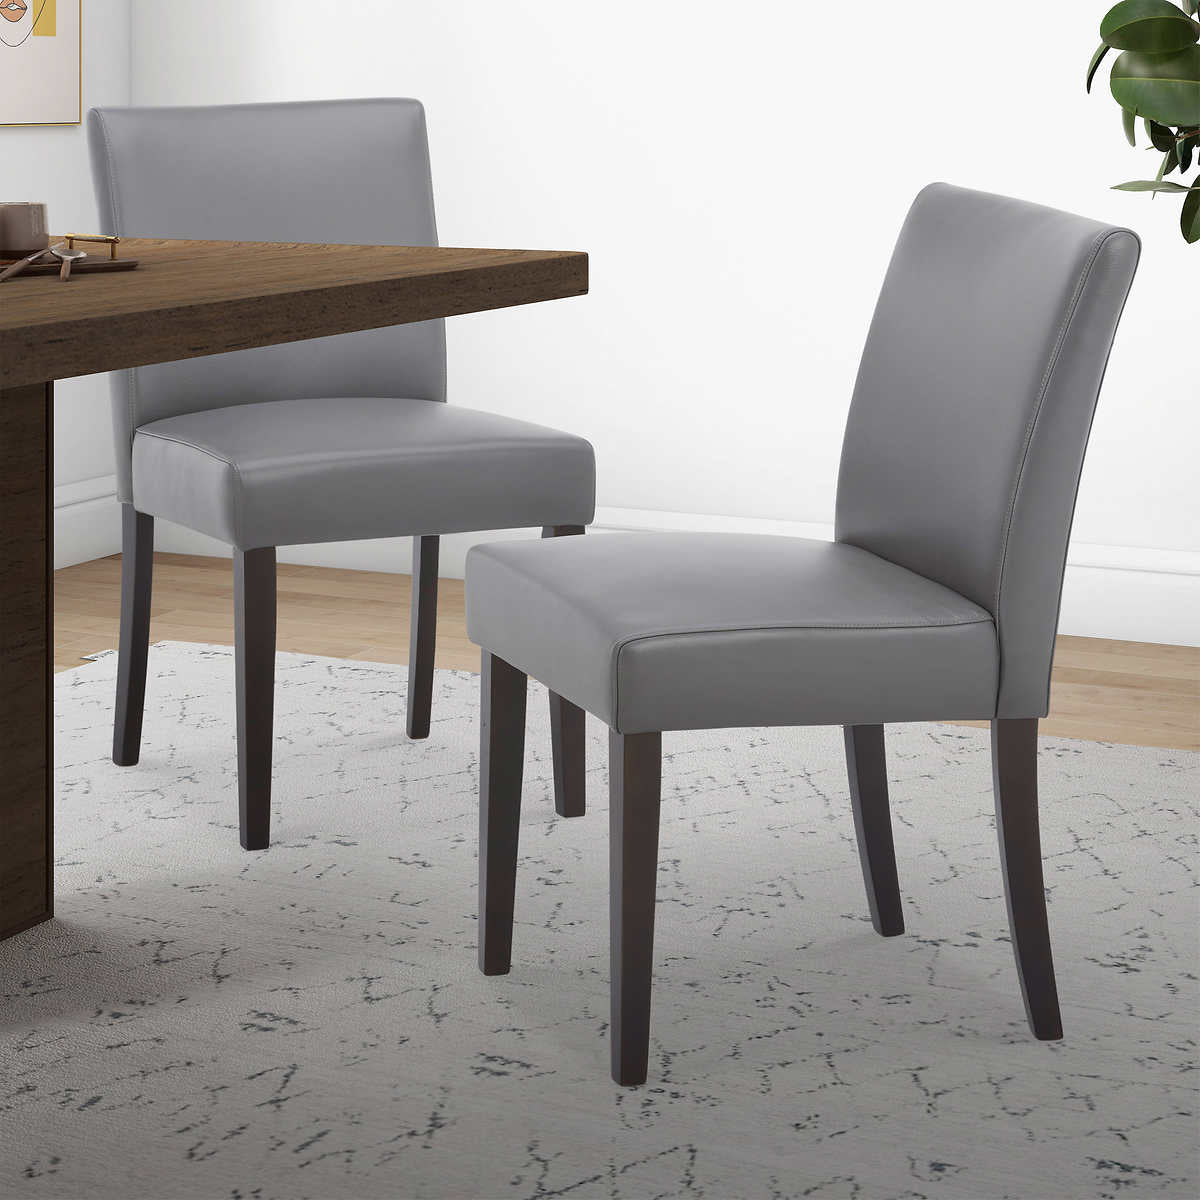 Costco - Denning Top Grain Leather Dining Chair, Grey, 2-Pack - Retail $329